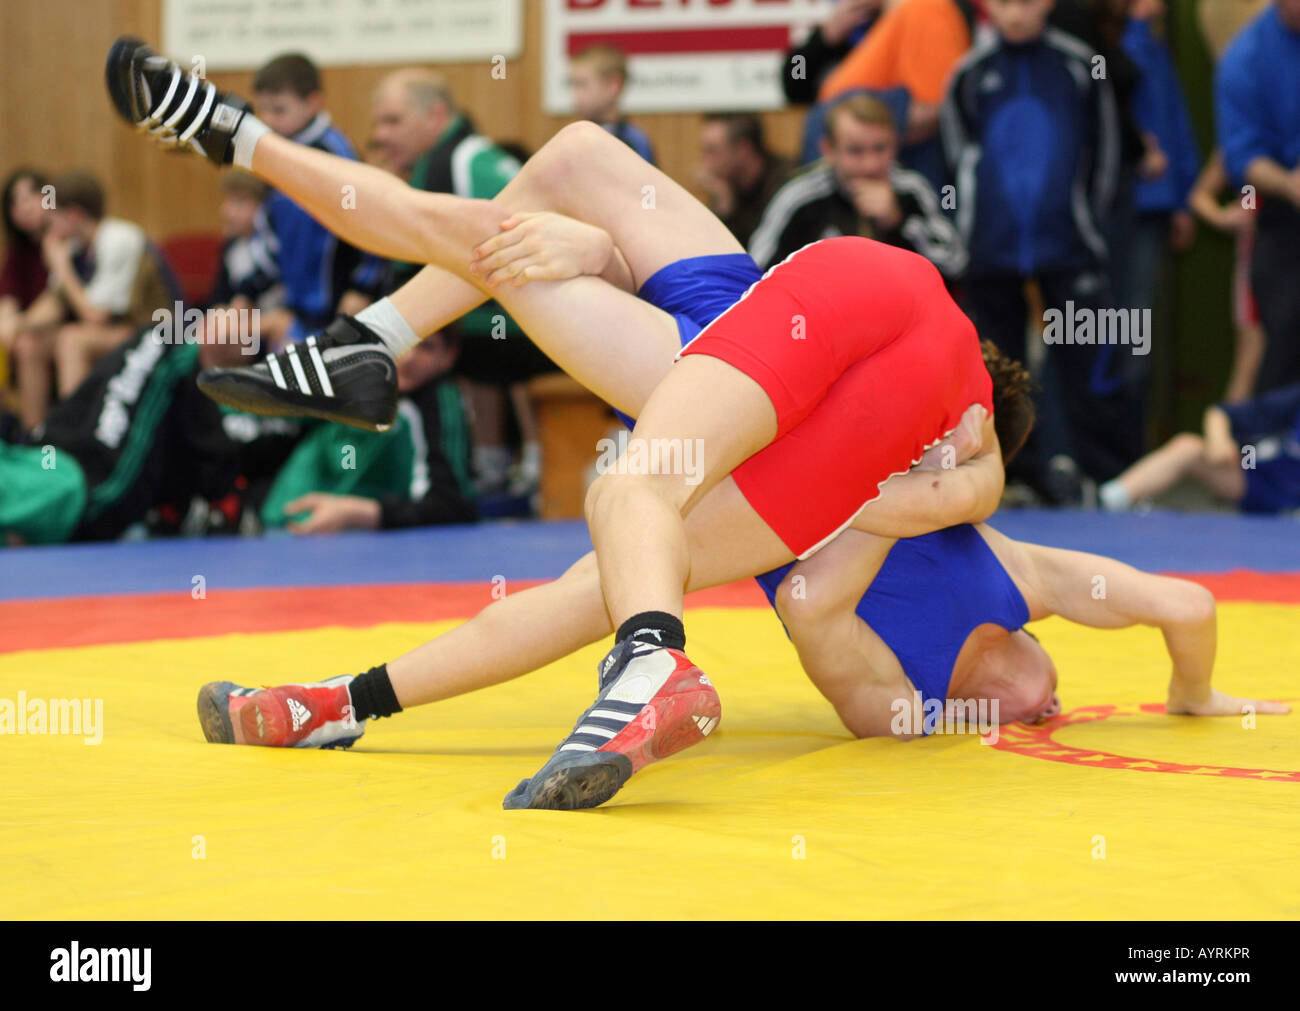 Wrestlers during a match Stock Photo